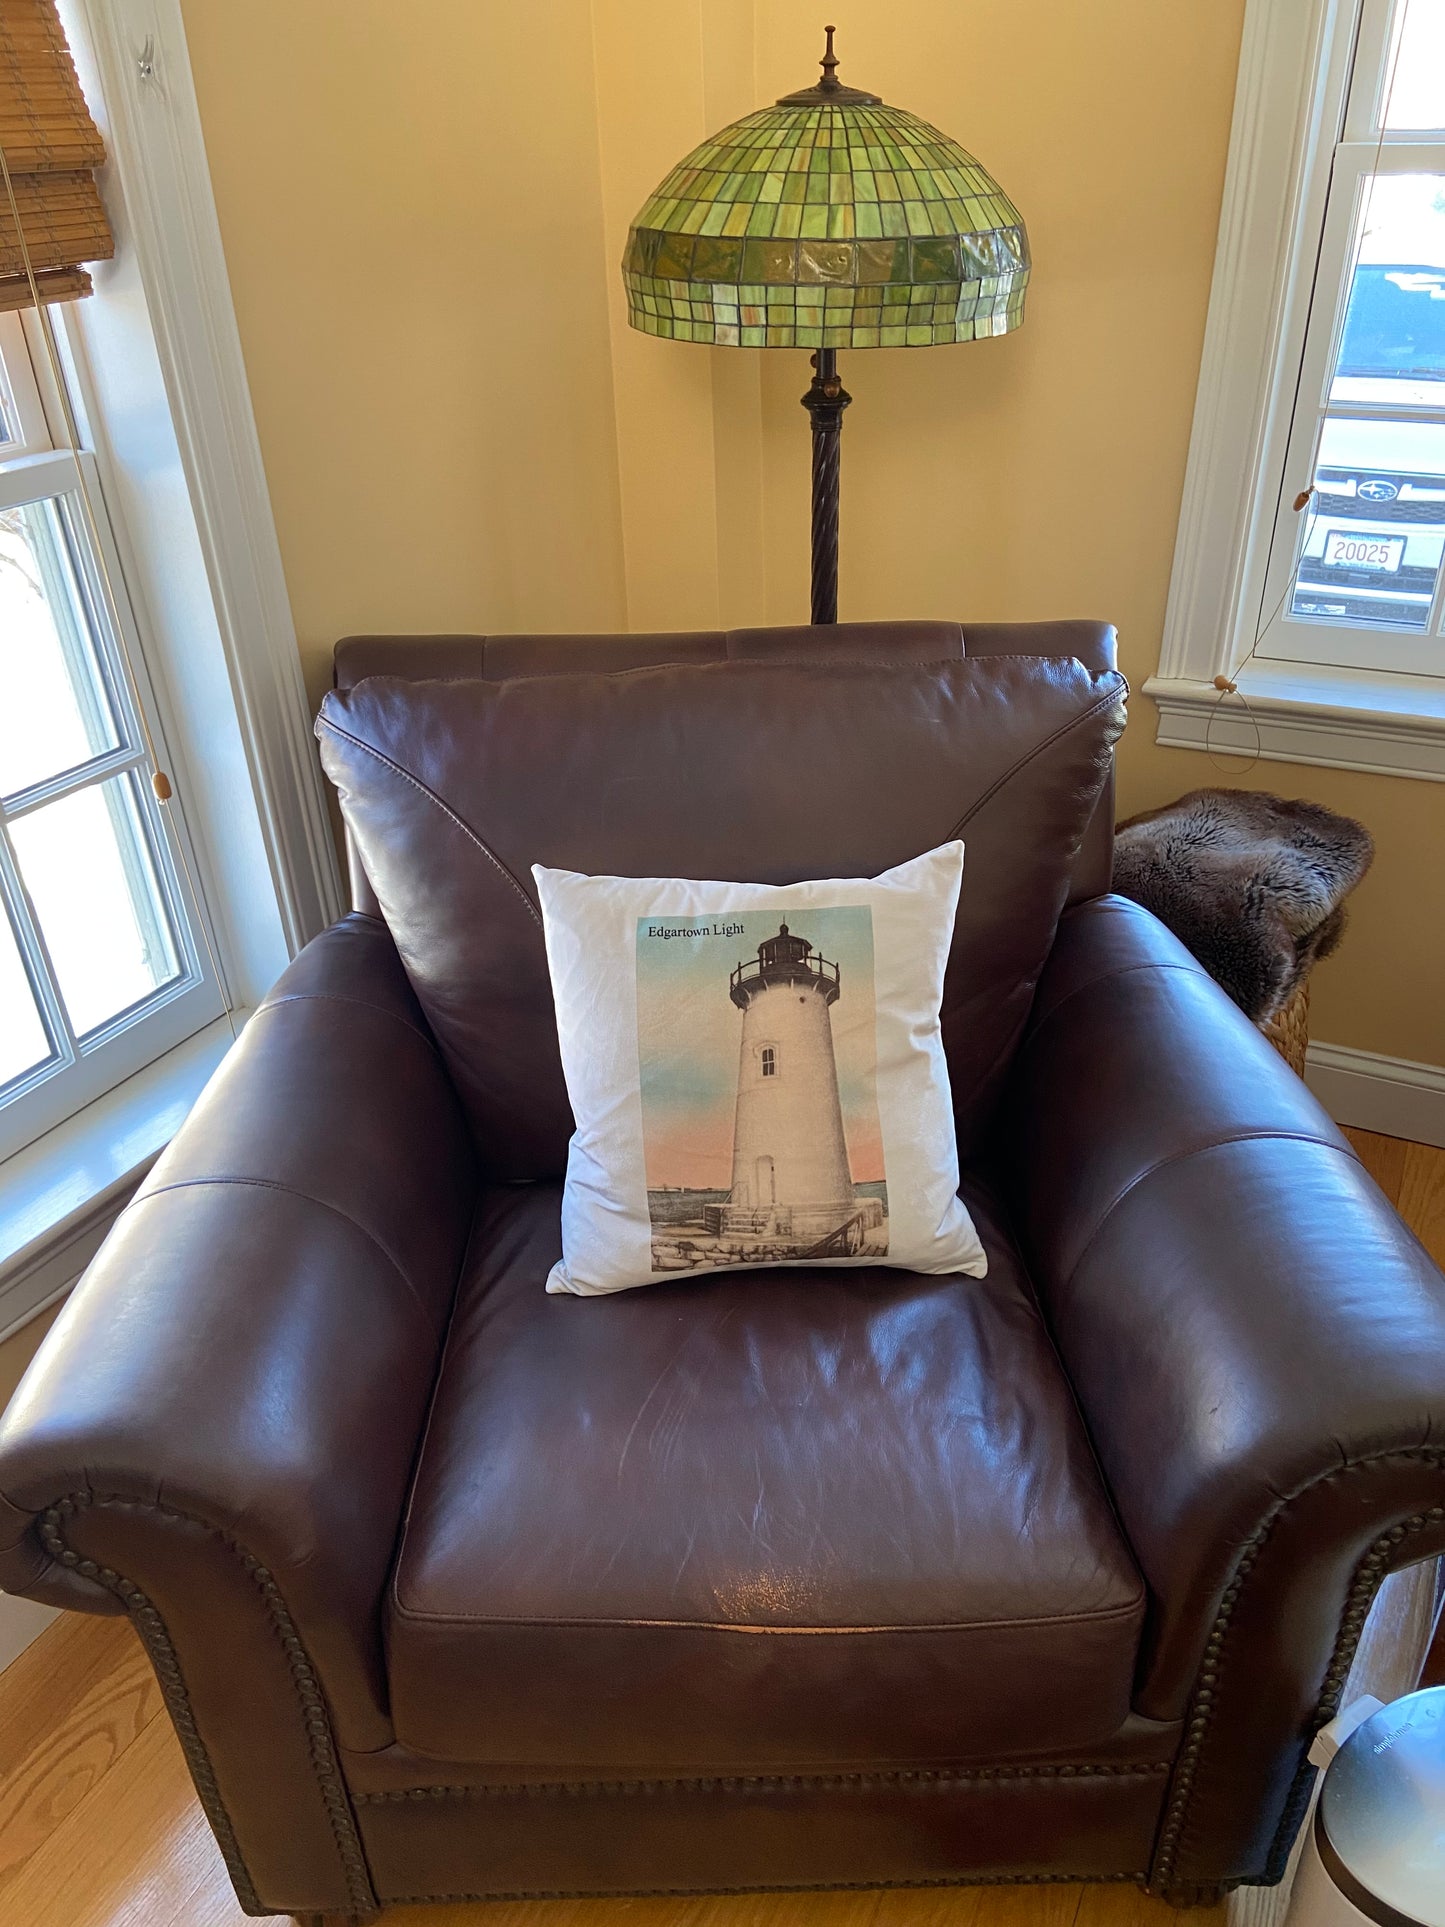 Edgartown Lighthouse Pillow in Soft Sueded Cotton